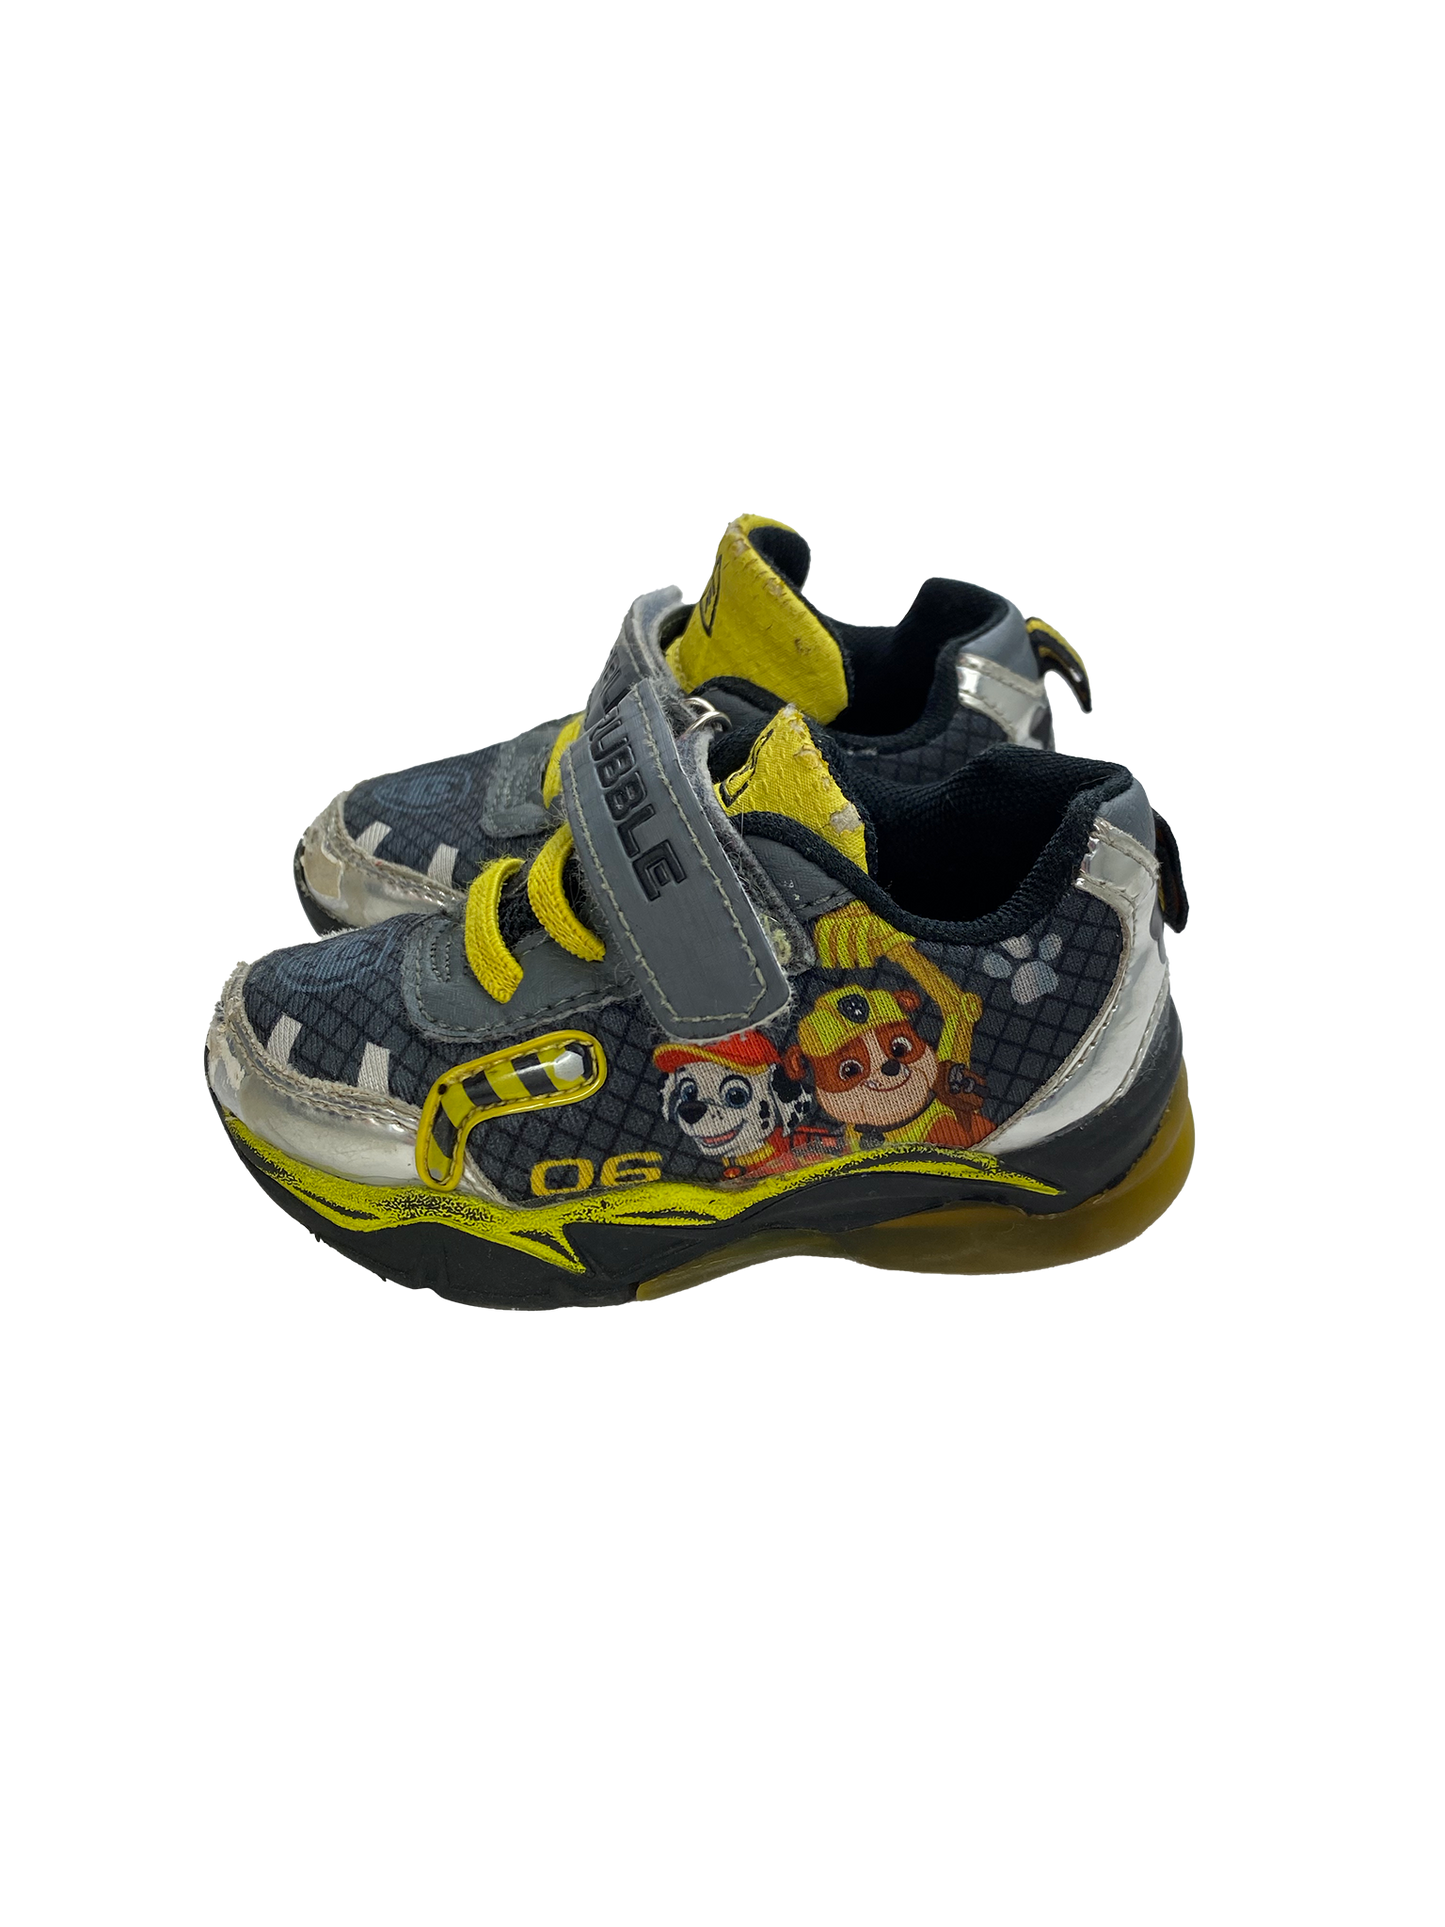 Paw Patrol Grey & Yellow Running Shoes with "Rubble" & Pups 5